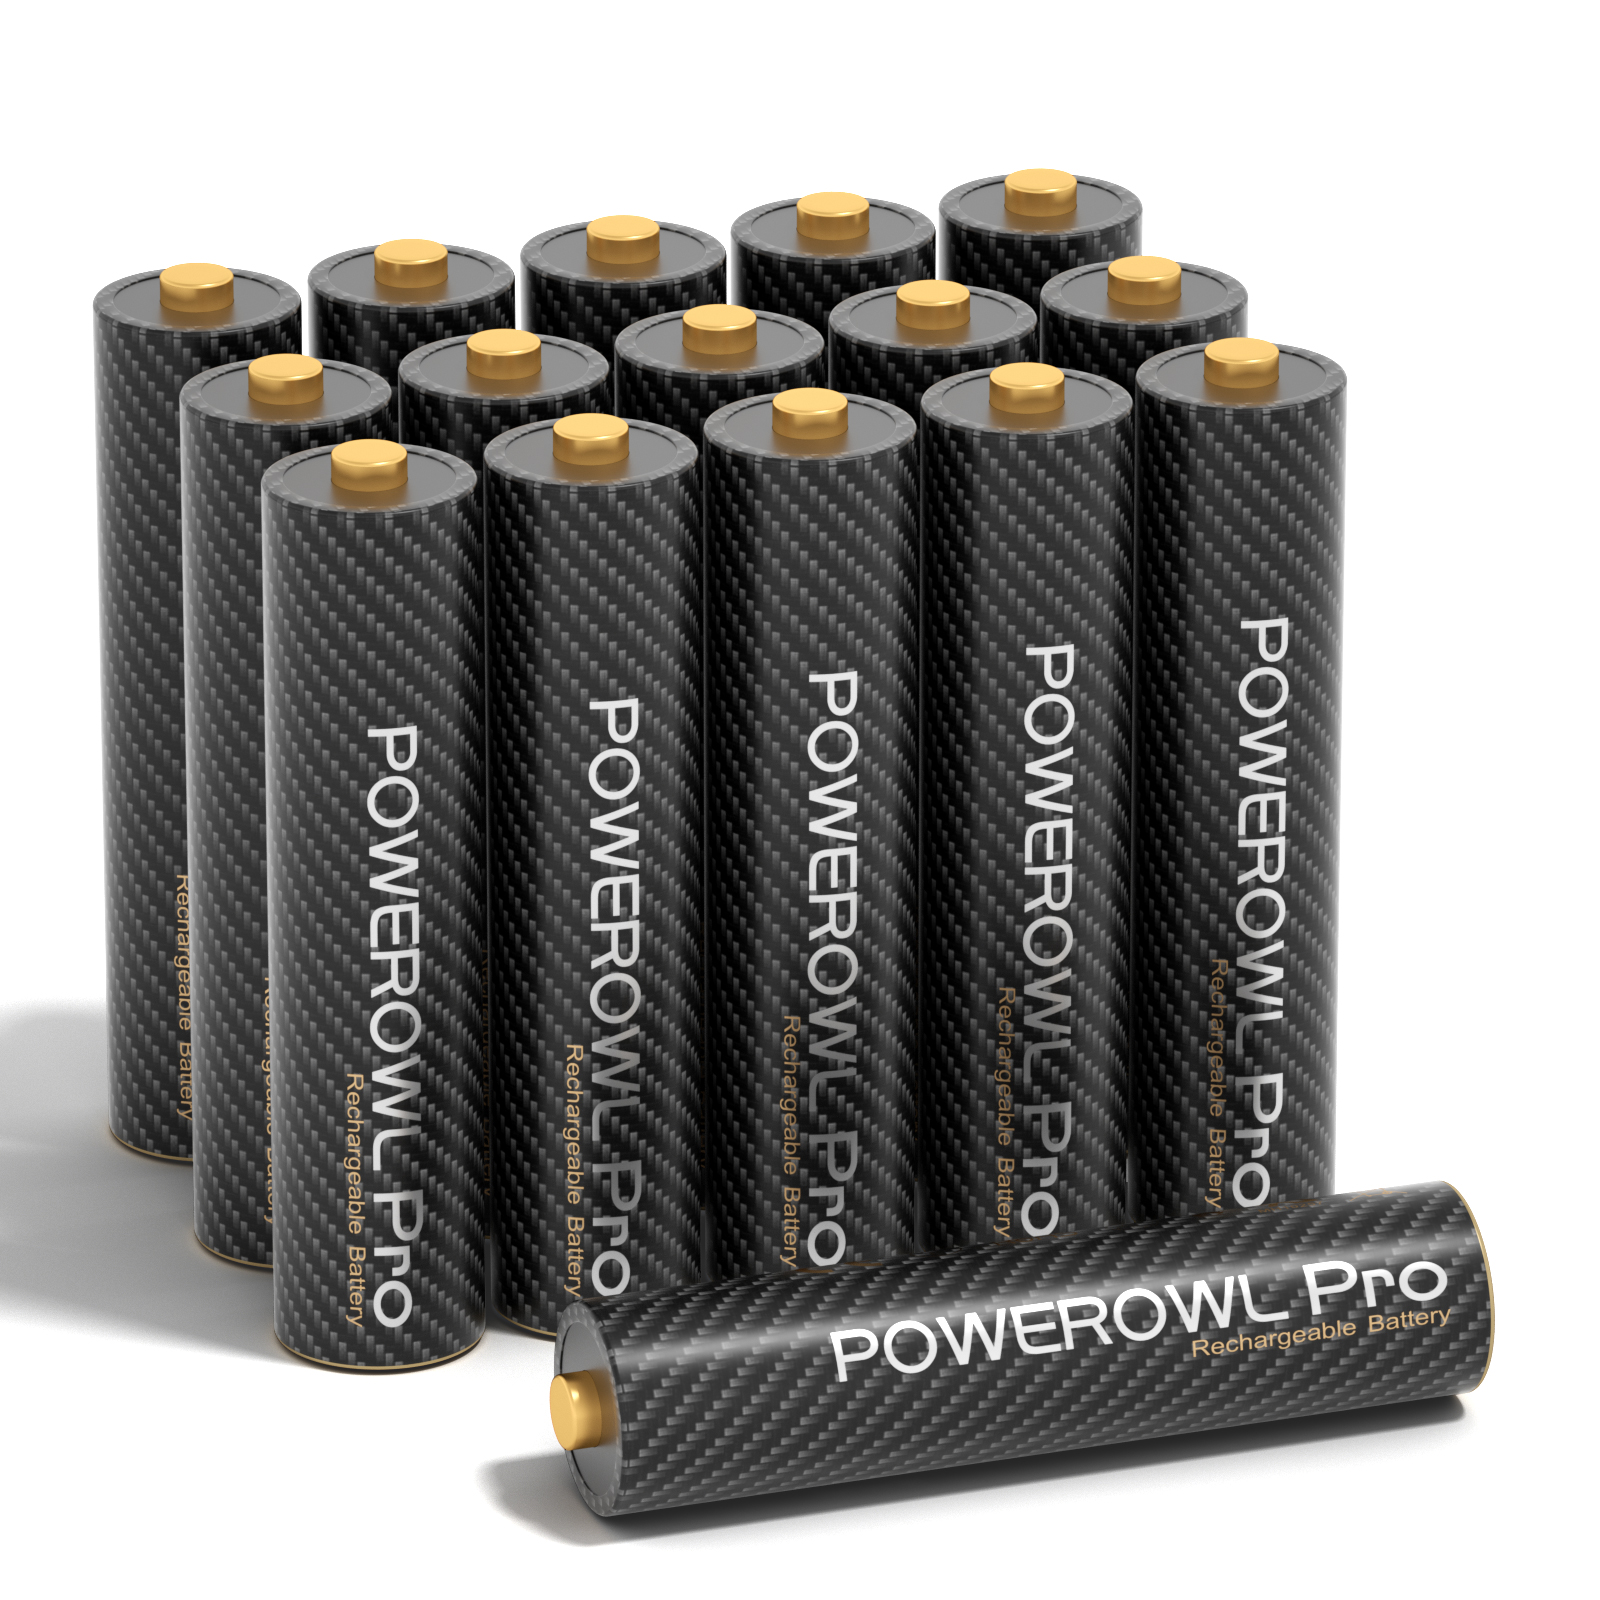 POWEROWL Rechargeable AAA Batteries PRO, High Capacity 1100mAh, Premium NiMH Triple A Battery -16 Count